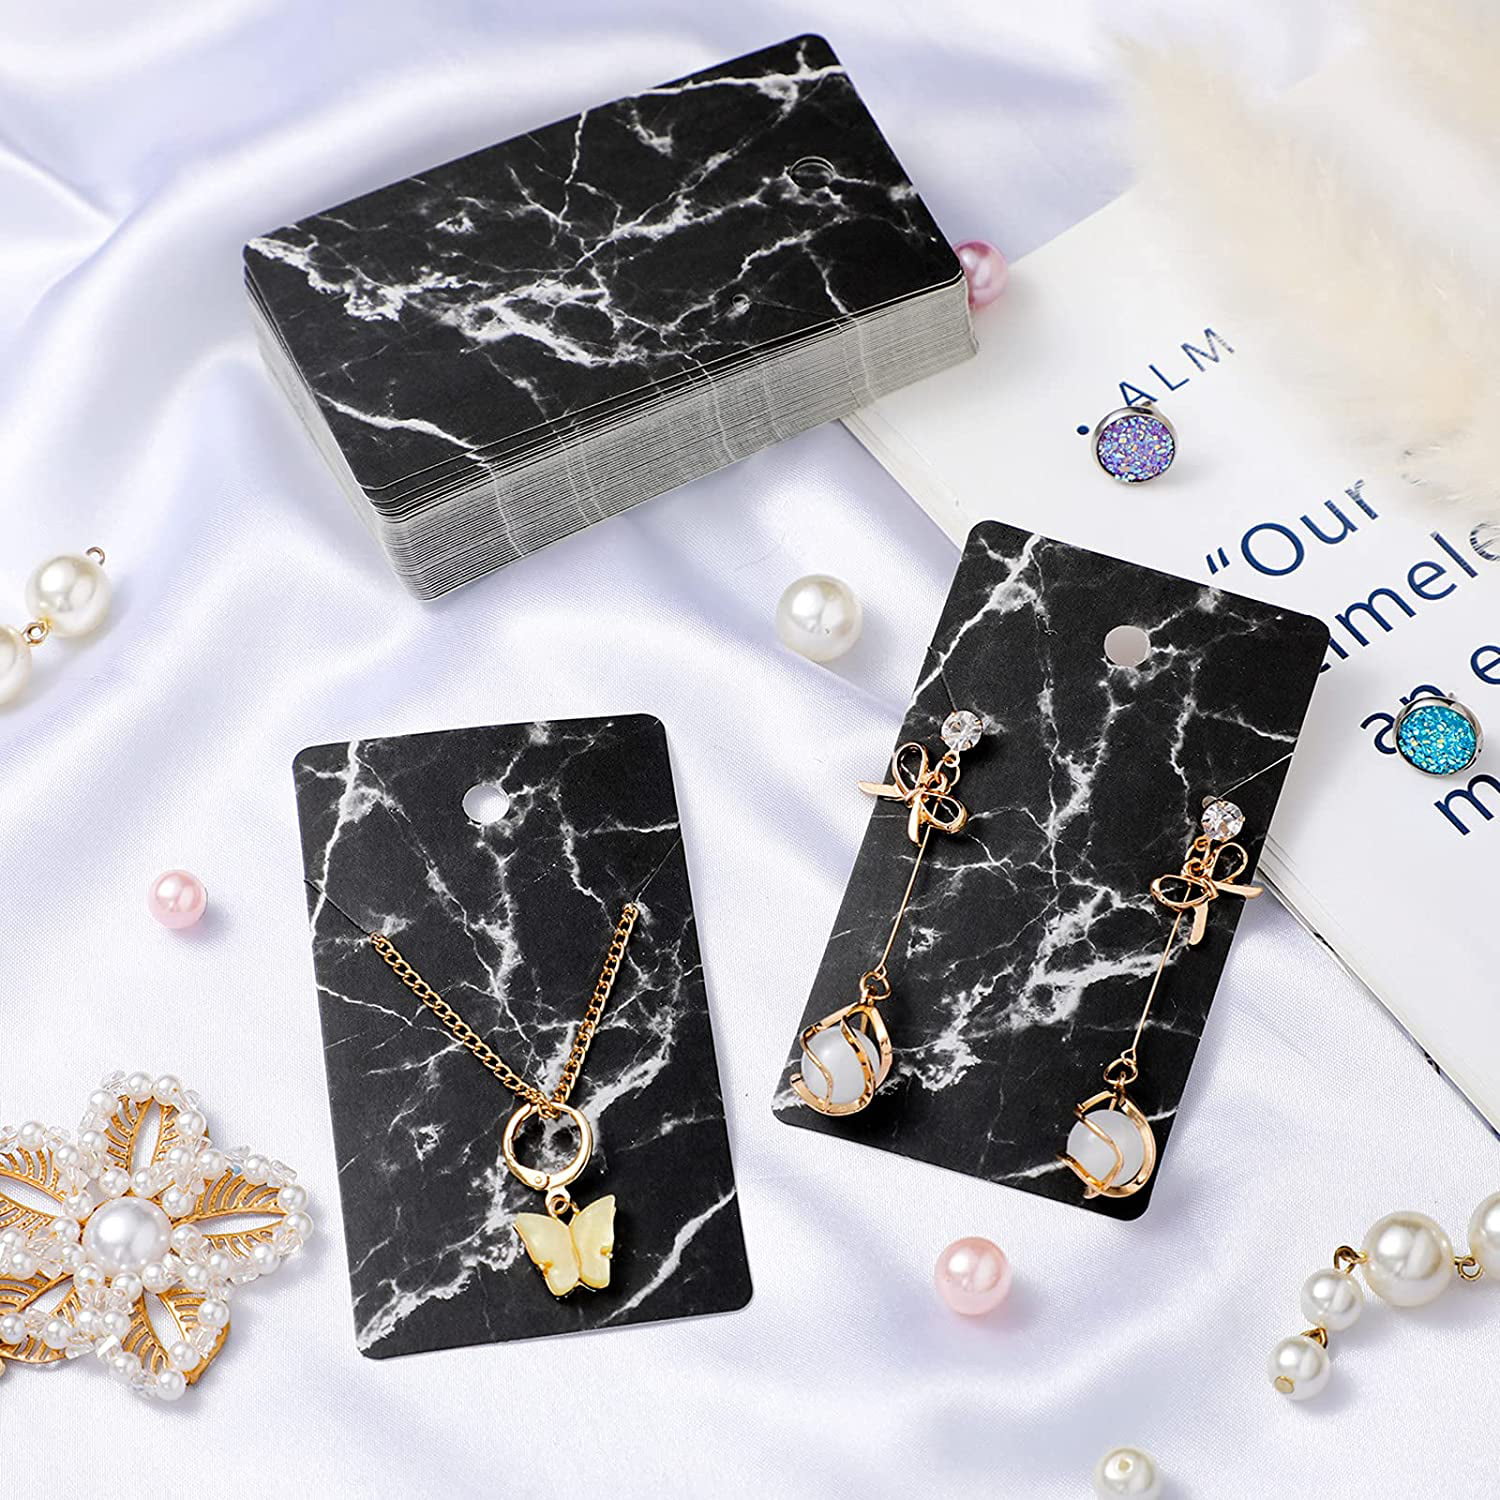 500 Pieces Marble Earring Necklace Display Card Holder Set Include 100 Pieces 3.5 x 2 Inch 100 Pieces 4.7 x 2 Inch Jewelry Display Cards 200 Pieces Earring Backs 100 Self-Seal Bags for Jewelry Packing 